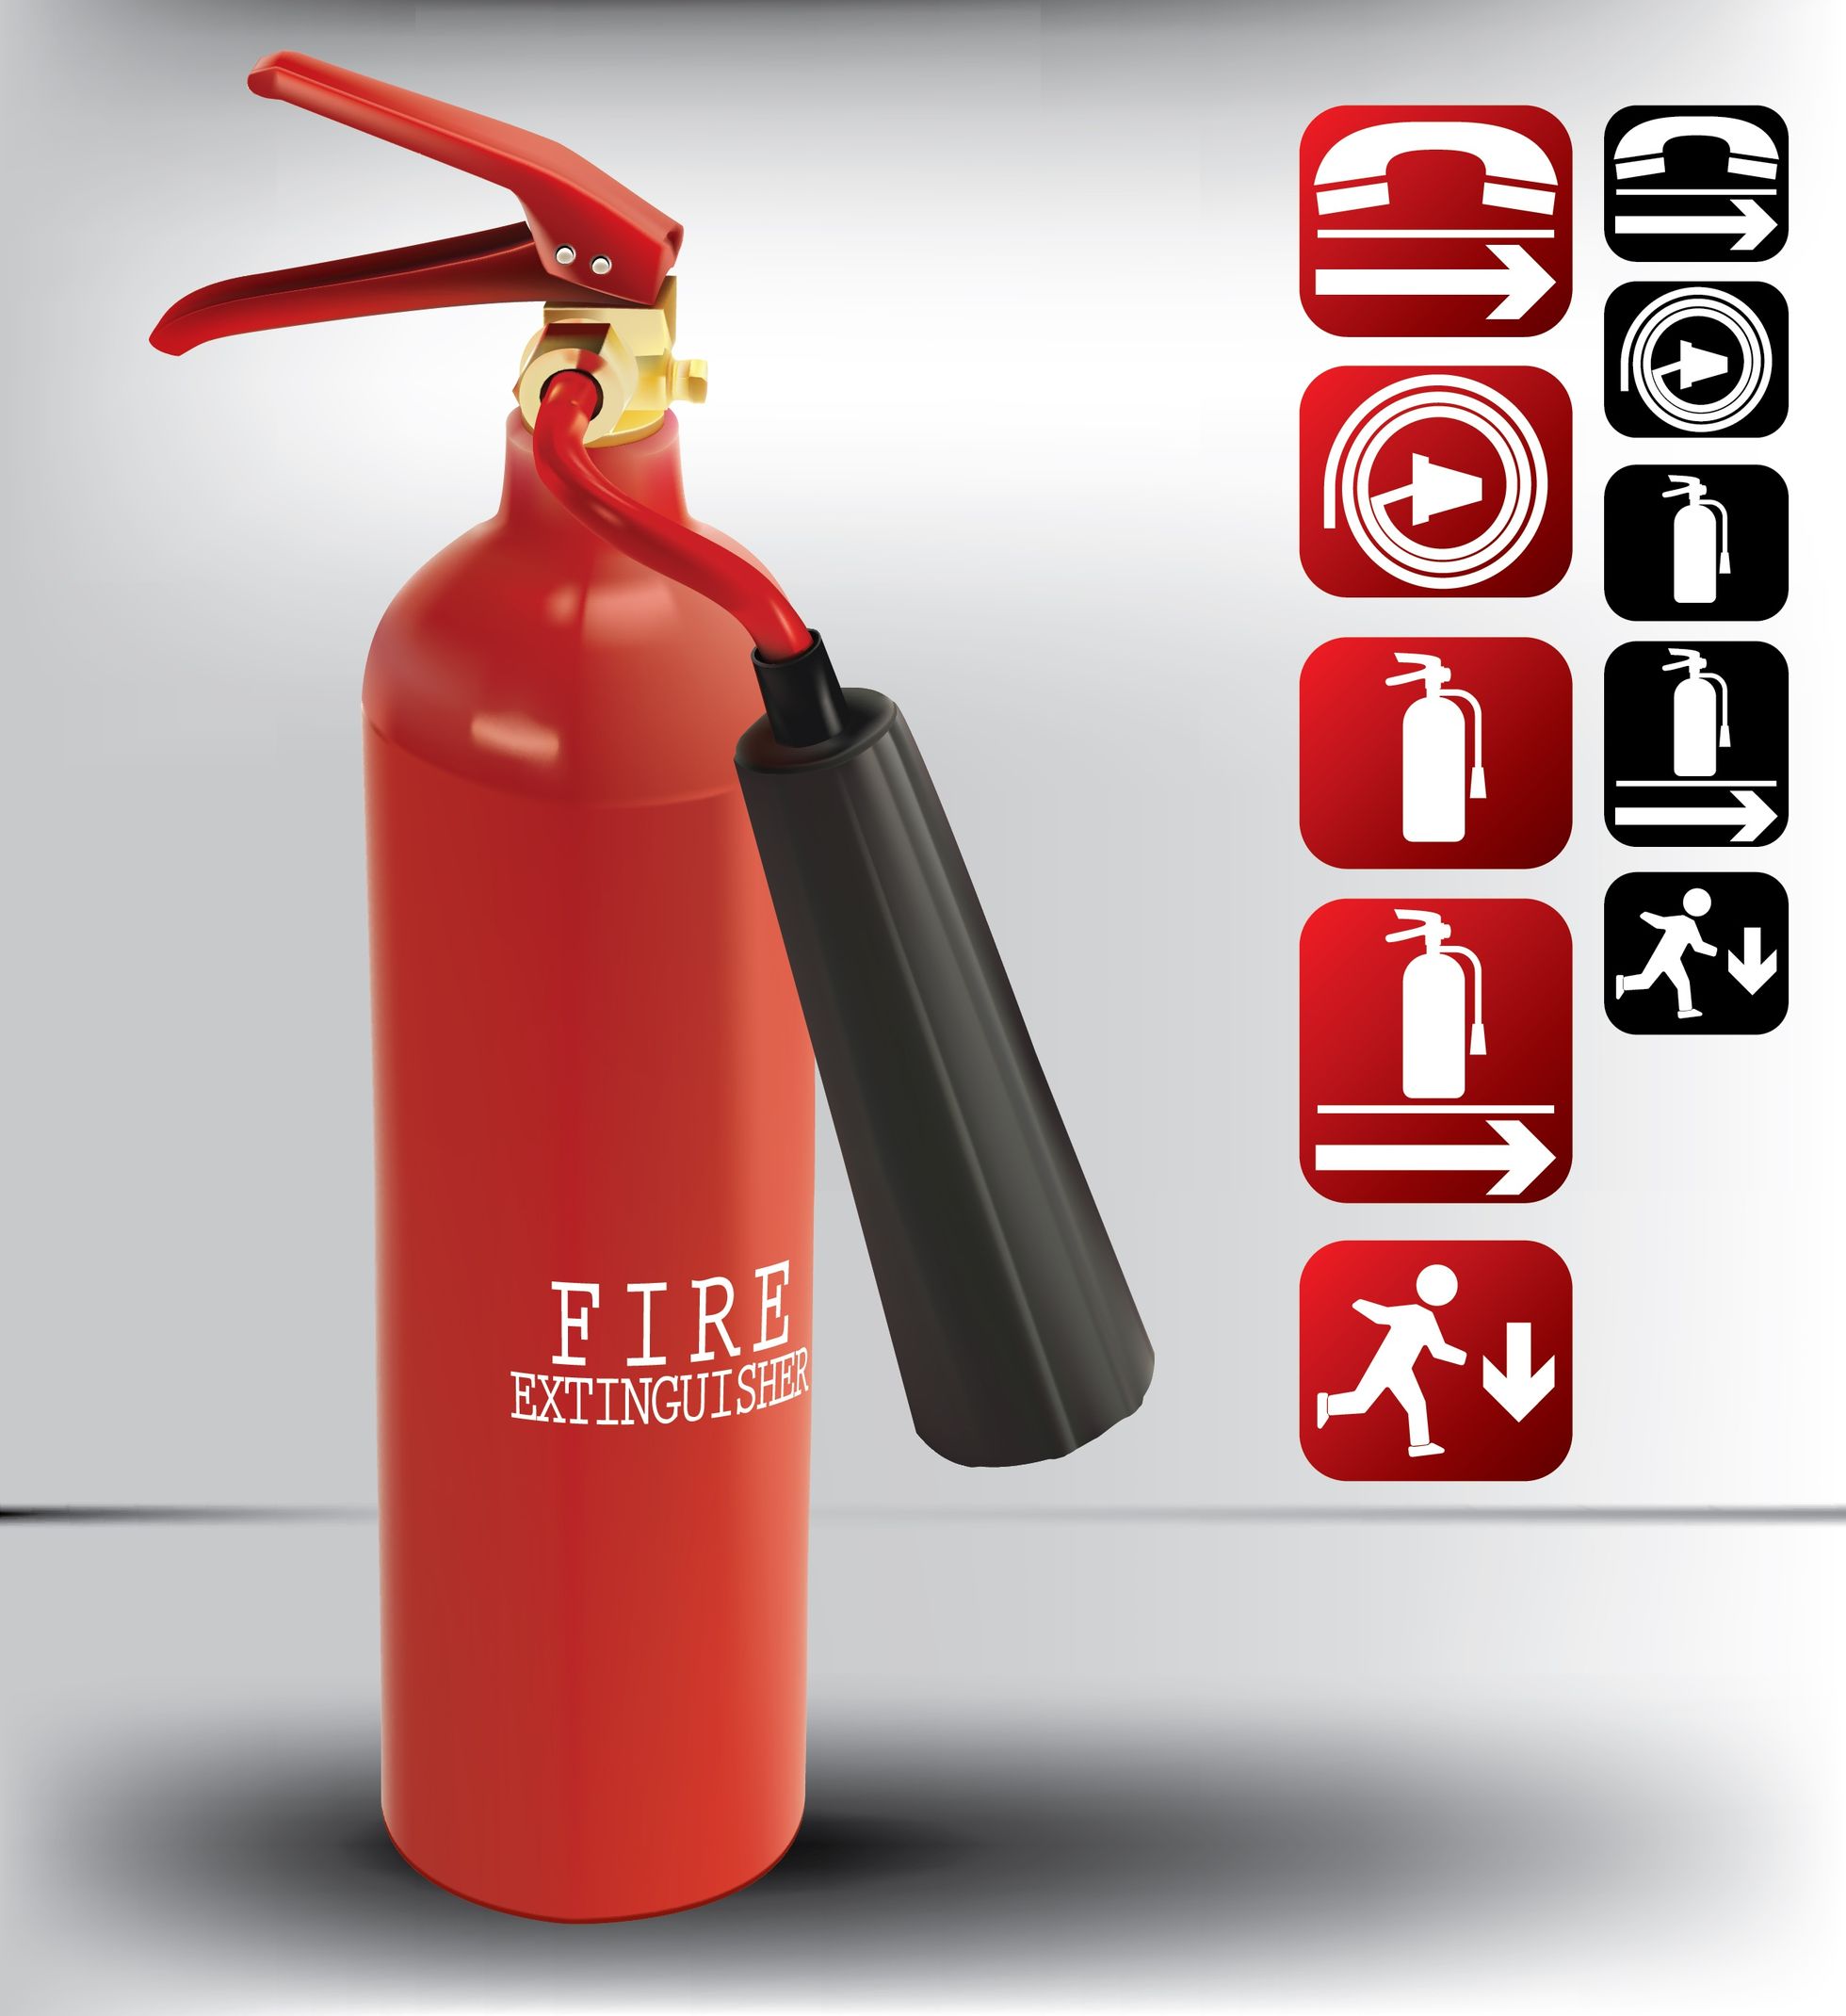 What Every Rapid City Business Owner Should Know About Fire Extinguishers